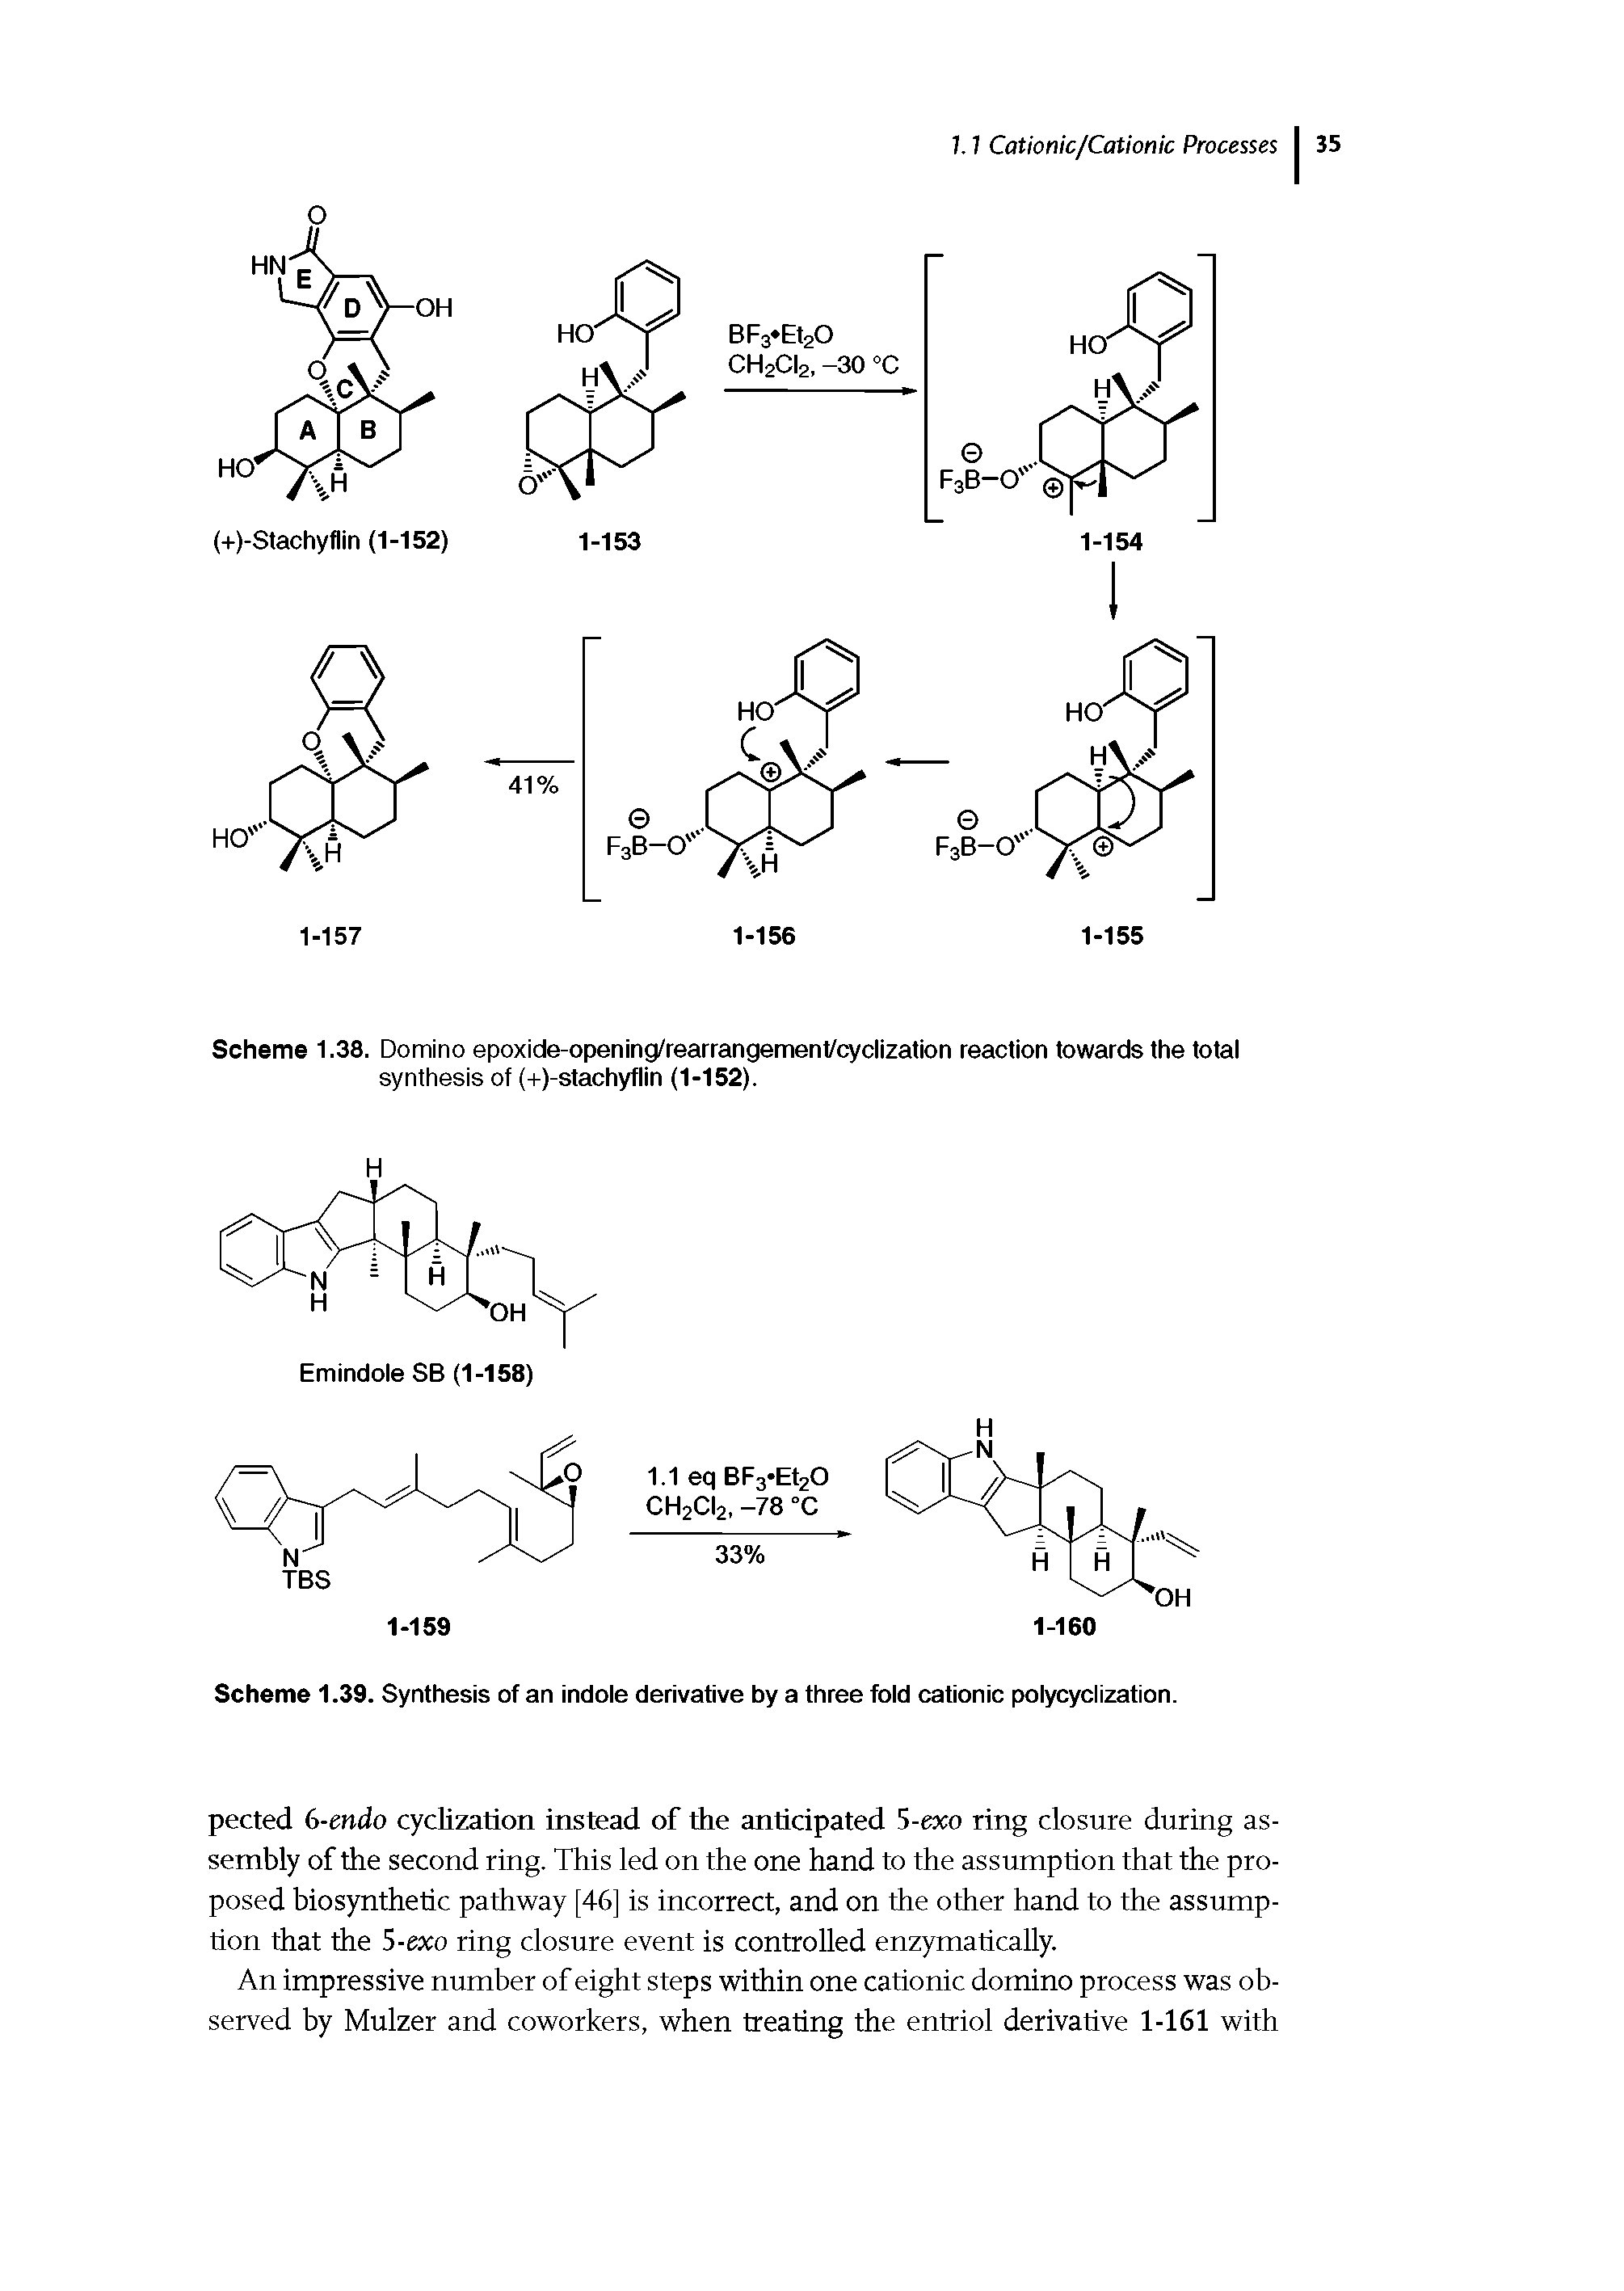 Scheme 1.39. Synthesis of an indole derivative by a three fold cationic polycyclization.